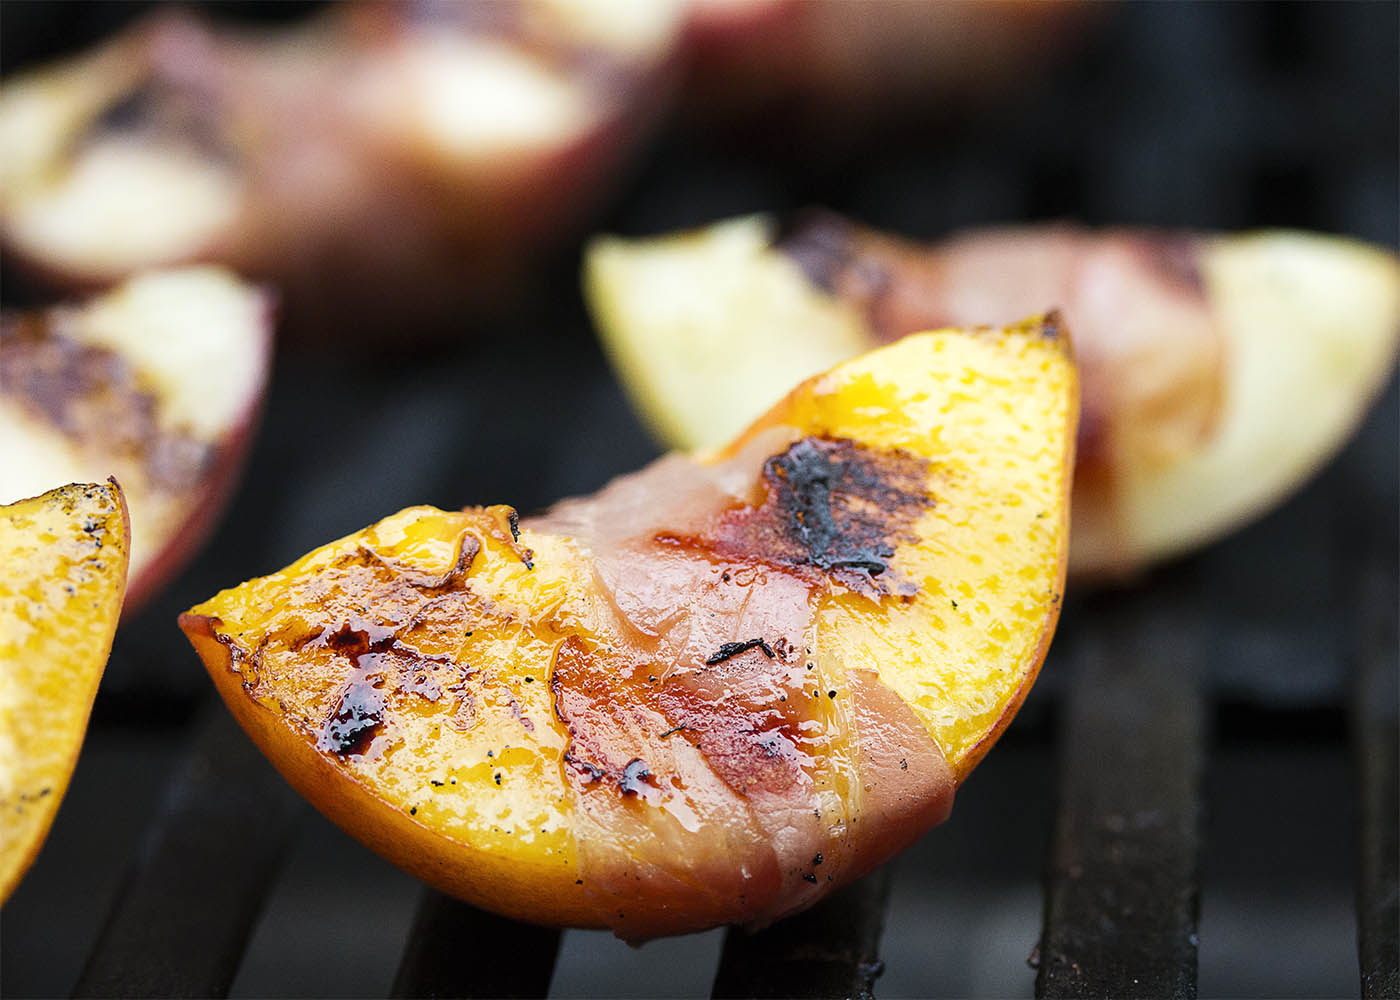 Balsamic Grilled Peaches with Burrata and Prosciutto - Sweet, salty, creamy, and tart combine in this recipe to create a recipe full of bold flavors. Juicy, sweet peaches are wrapped in prosciutto and seared on the grill, then drizzled with balsamic vinegar and paired with burrata. Wonderful as an appetizer or as a side dish. | justalittlebitofbacon.com